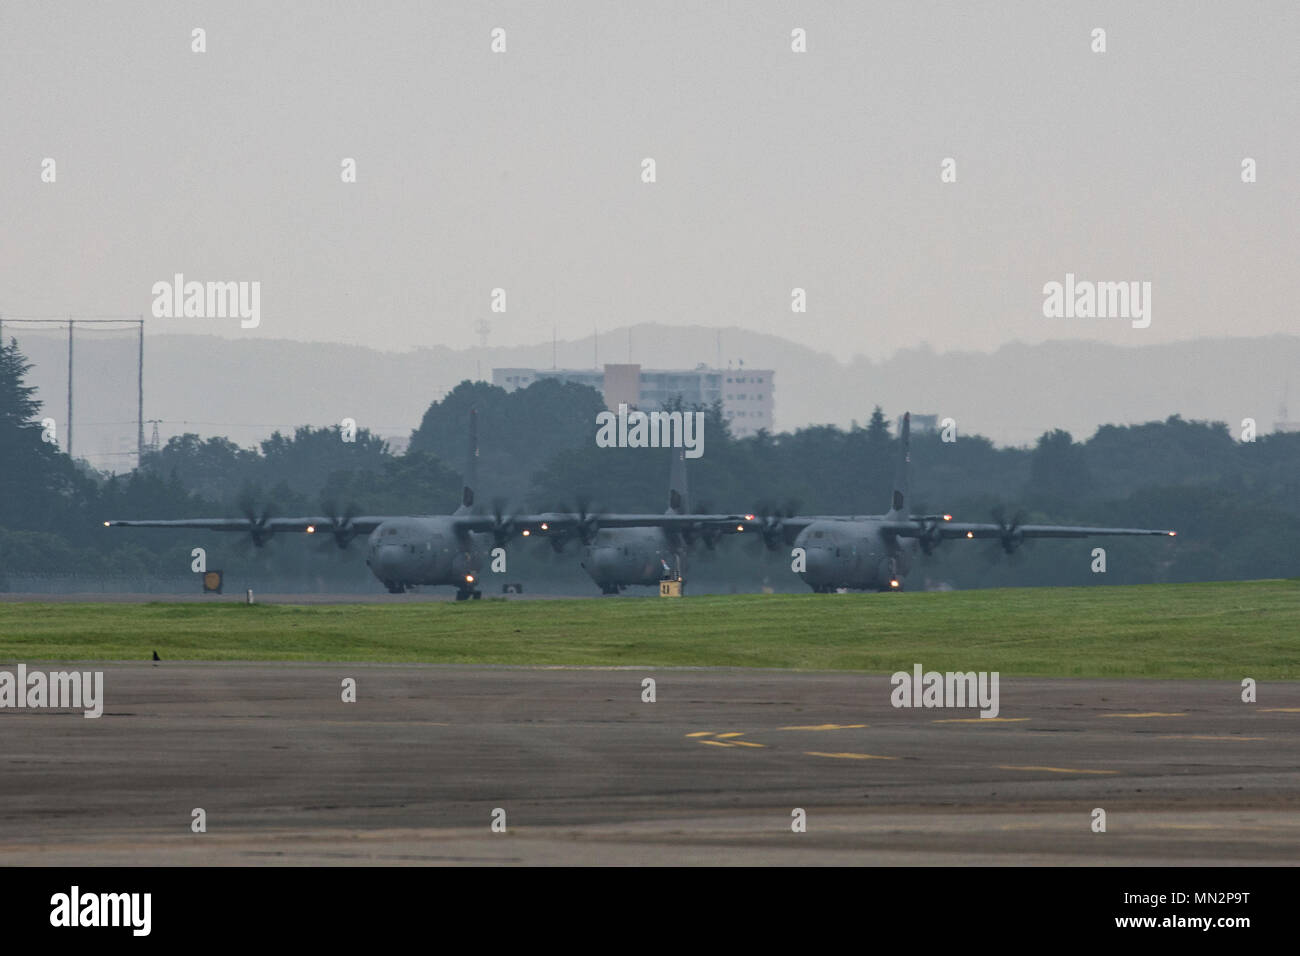 Three C-130J Super Hercules aircrafts prepare for takeoff during Exercise Beverly Morning 17-05 at Yokota Air Base, Japan, Aug. 18, 2017. The training is designed to test the ability of Airmen to survive in austere environments with chemical, biological, radiological, nuclear and explosive hazards. (U.S. Air Force photo by Yasuo Osakabe) Stock Photo